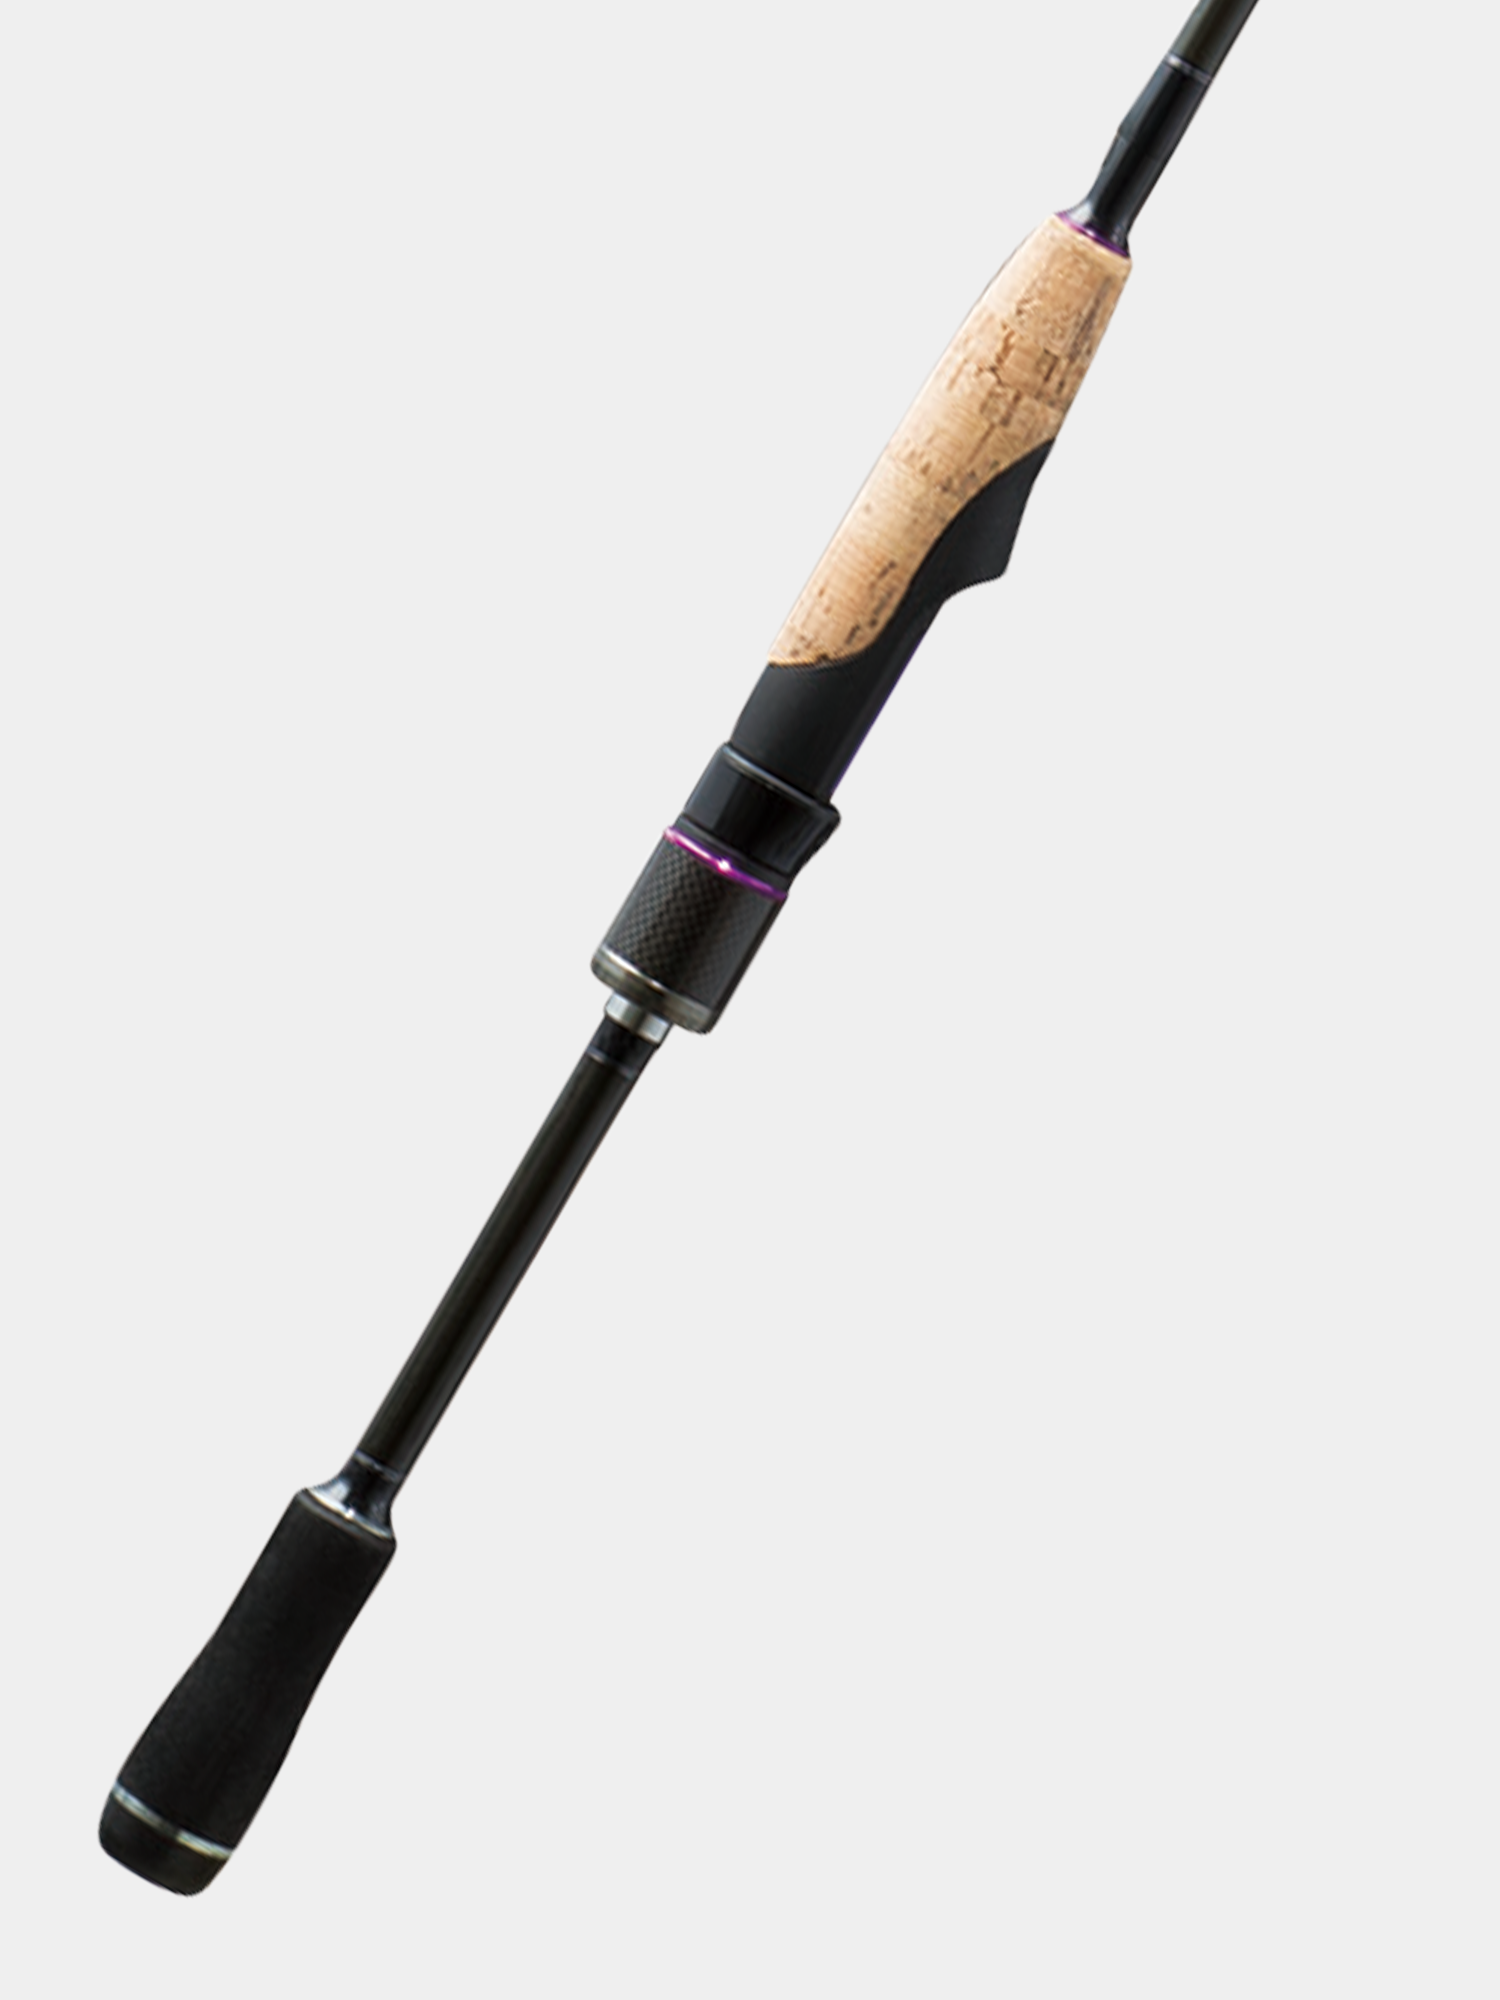 WILD SIDE 6'1” Light Spinning Rod by Arundel Tackle